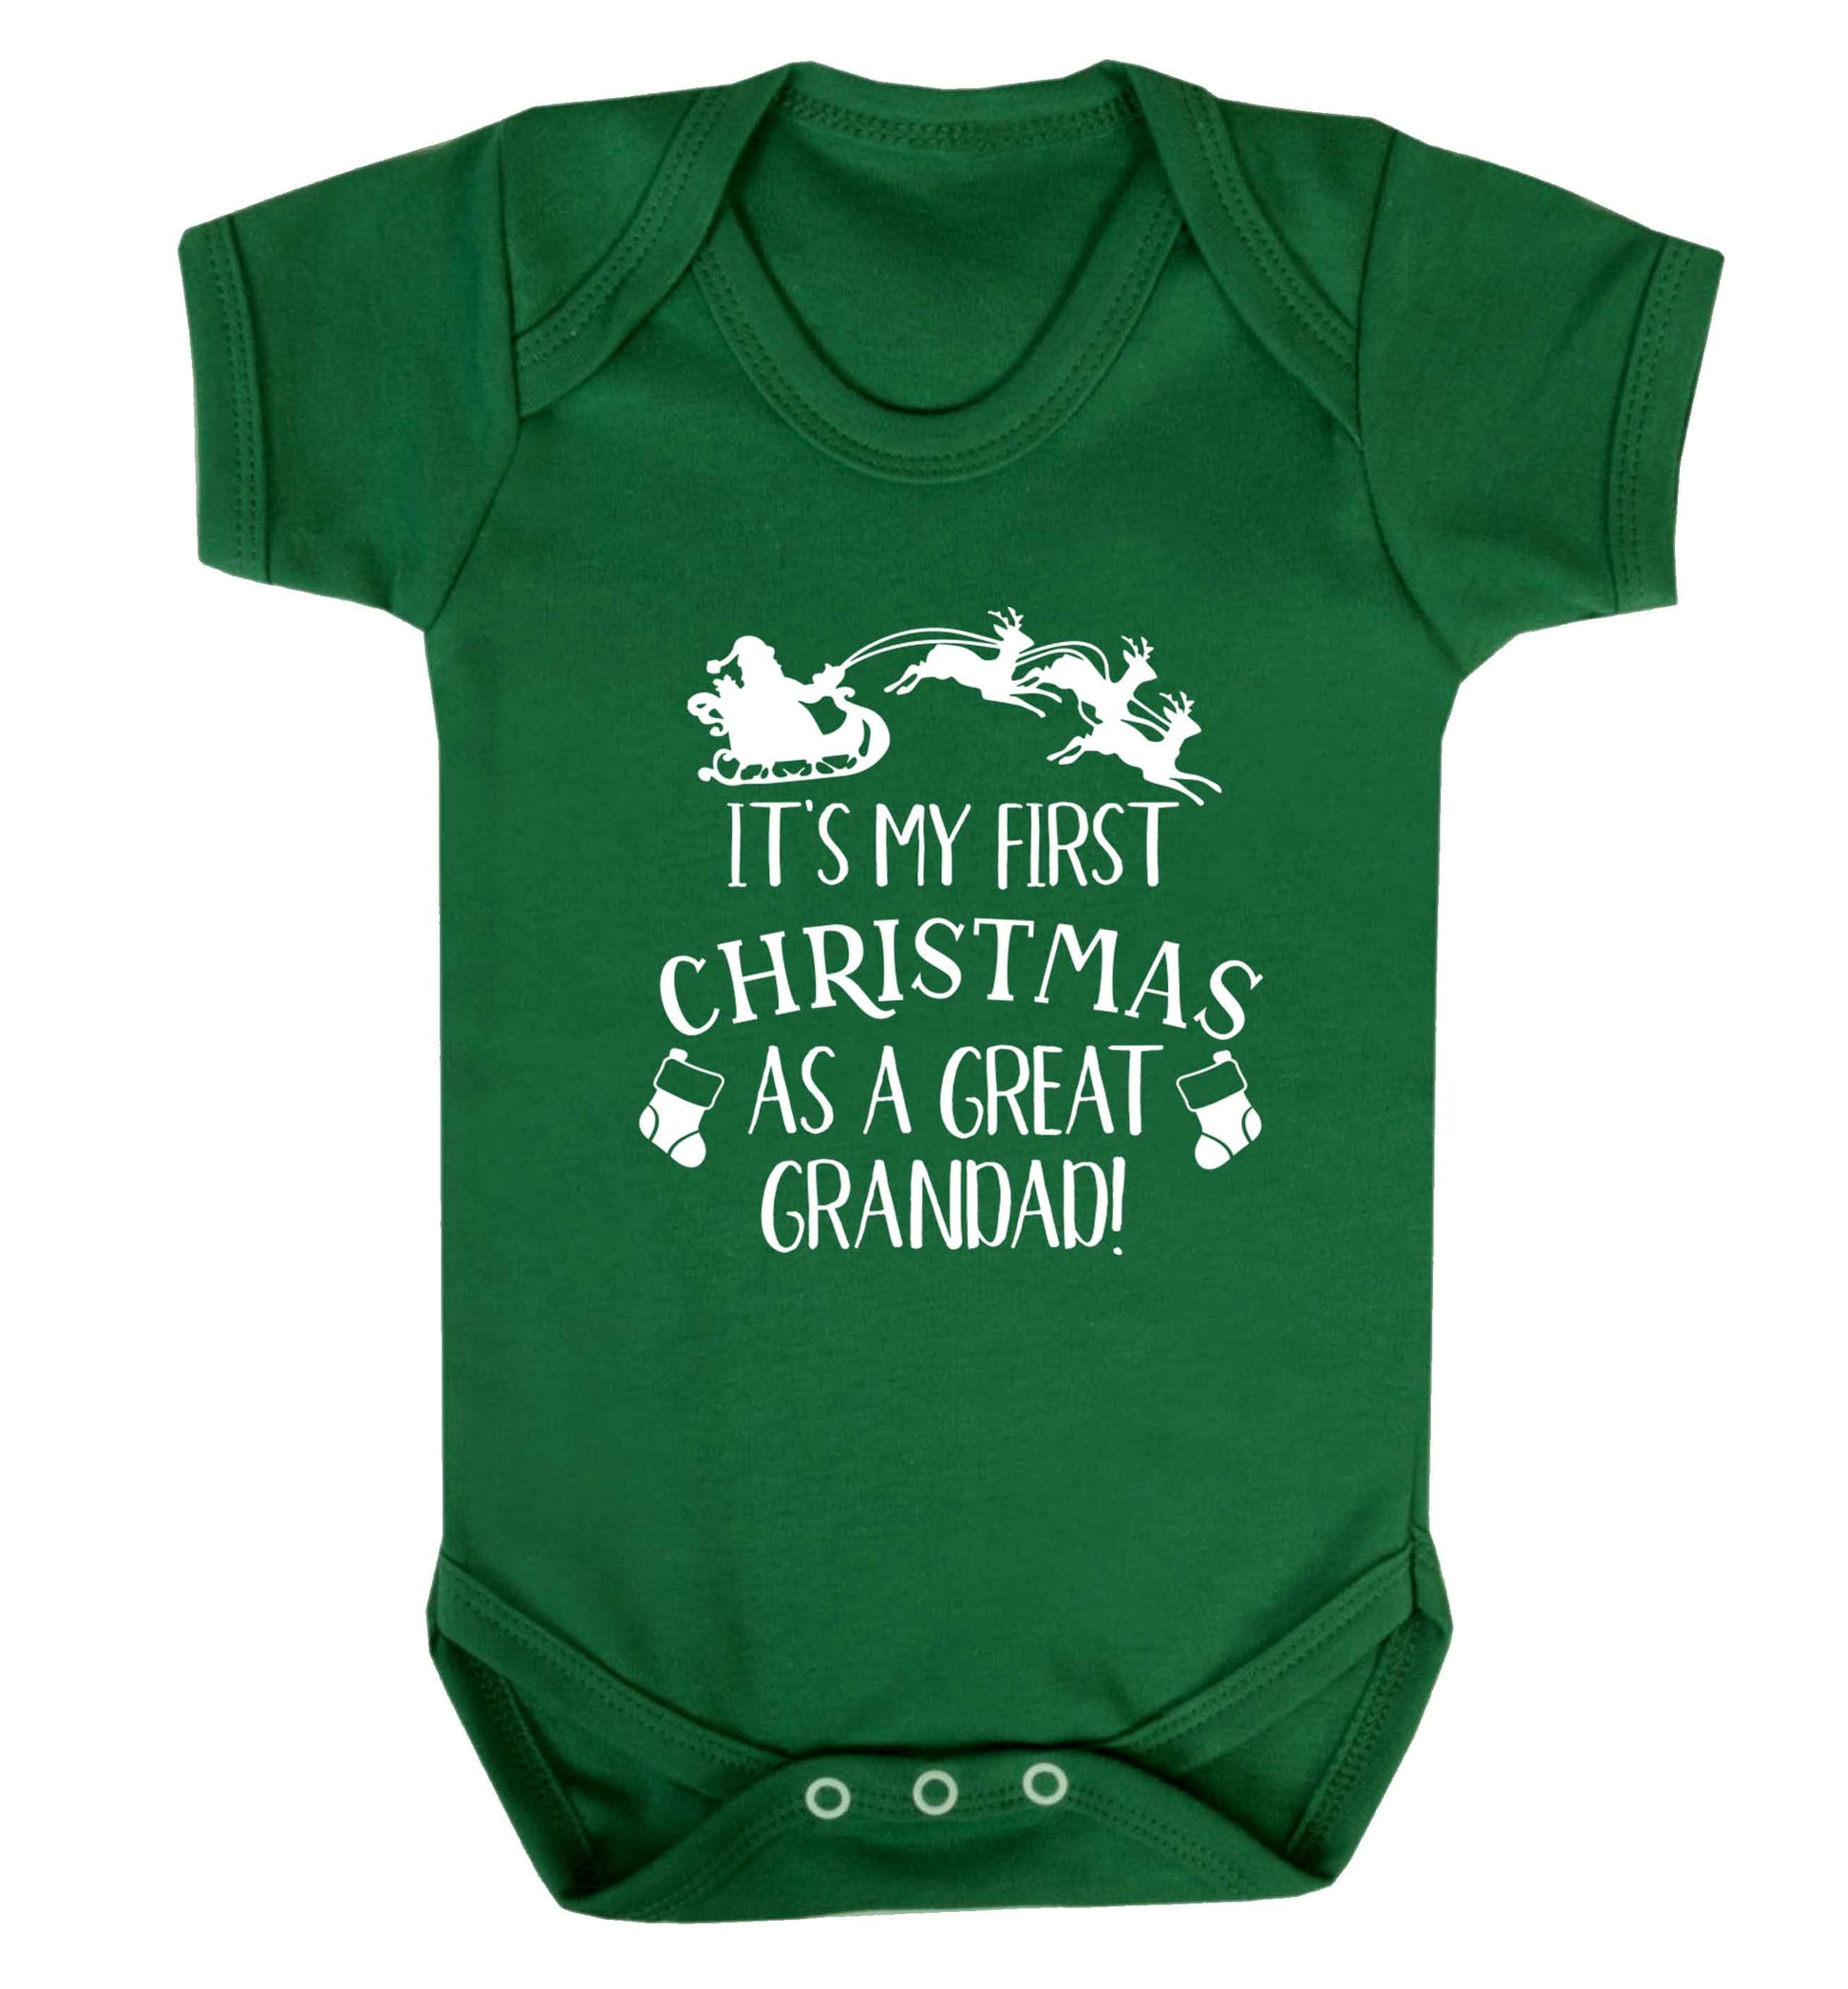 It's my first Christmas as a great grandad! Baby Vest green 18-24 months